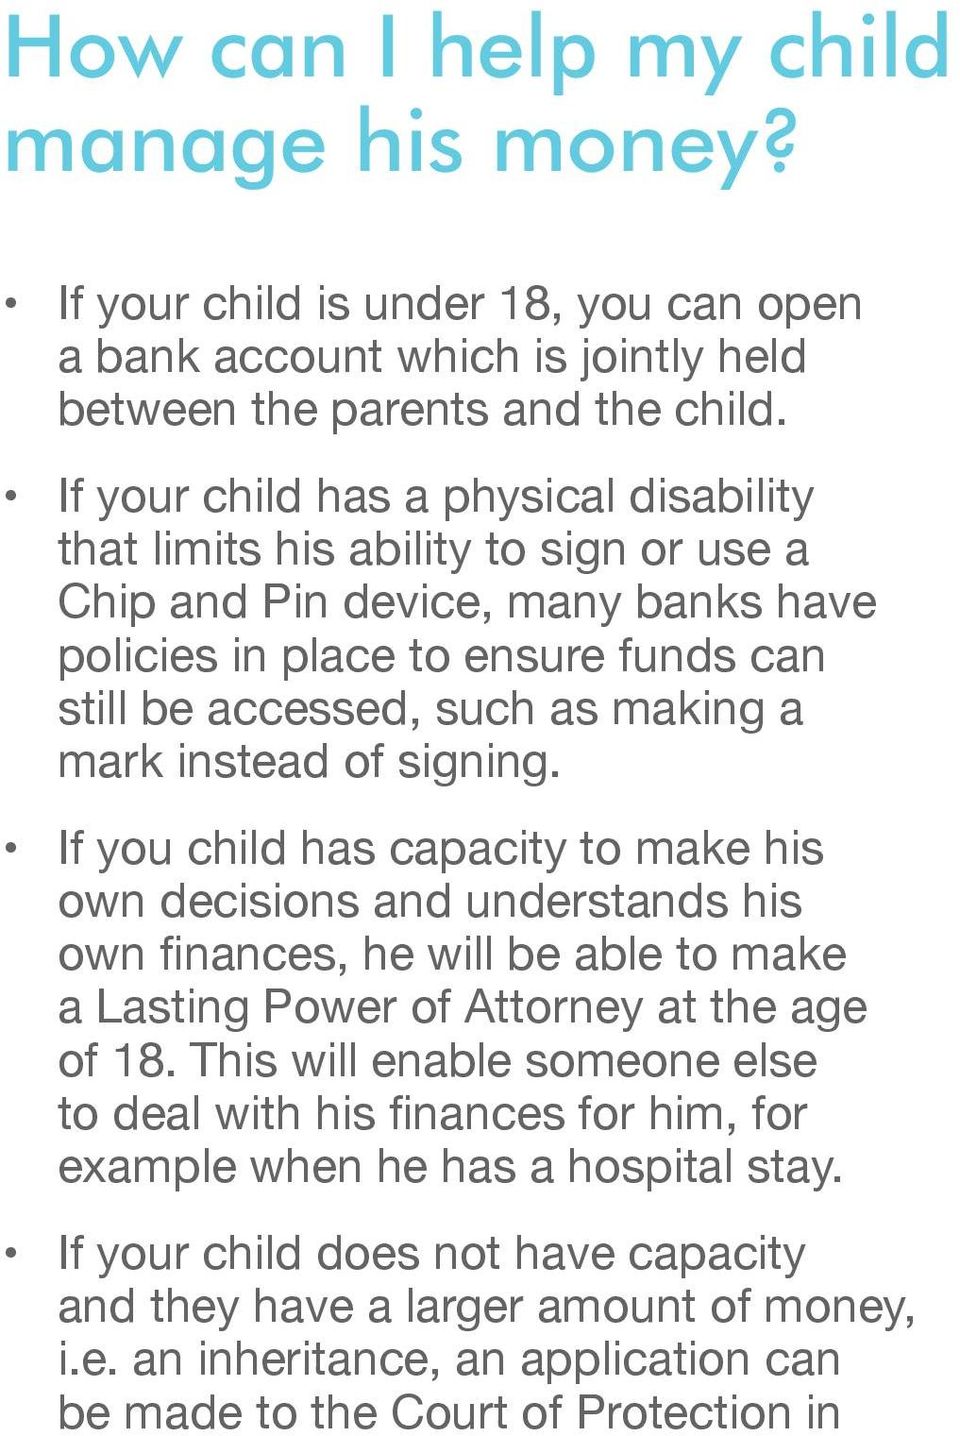 instead of signing. If you child has capacity to make his own decisions and understands his own finances, he will be able to make a Lasting Power of Attorney at the age of 18.